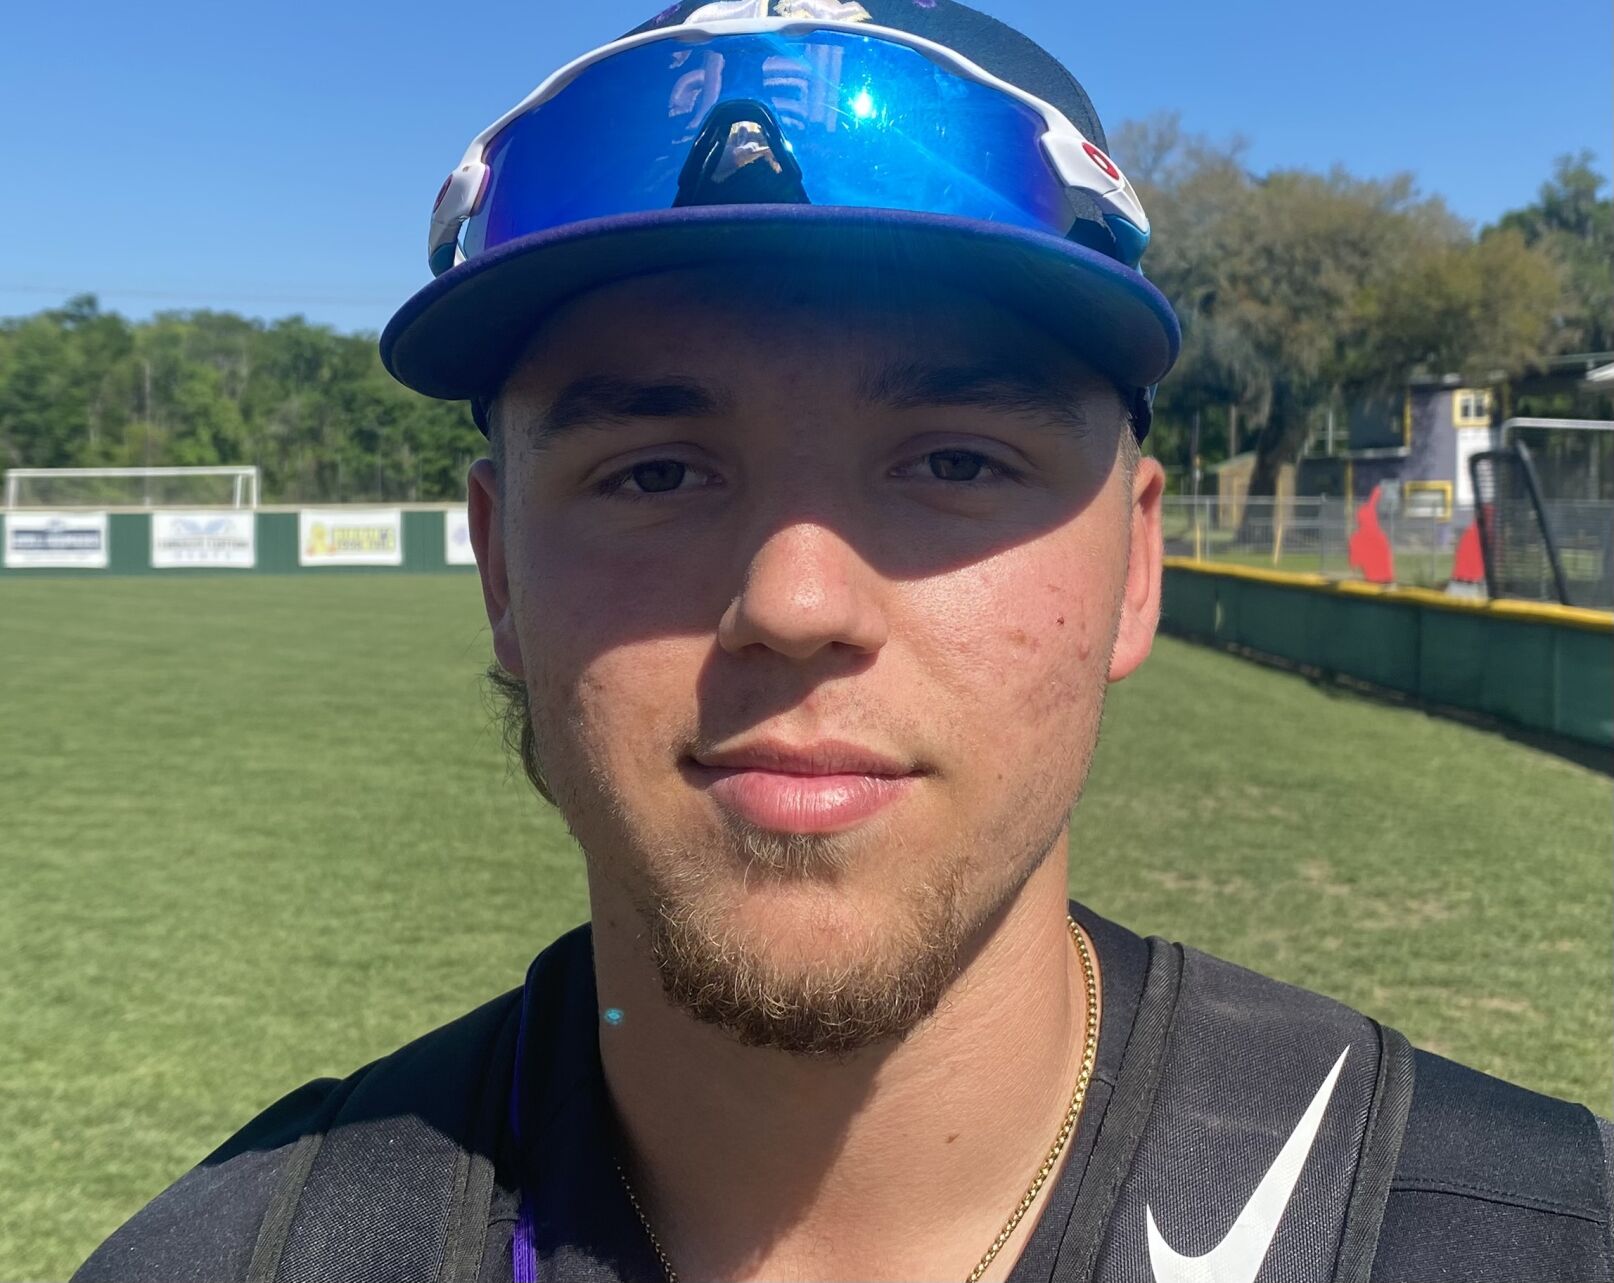 Talan Theriot Leads Hahnville to Fourth Straight Win with Stellar Performance